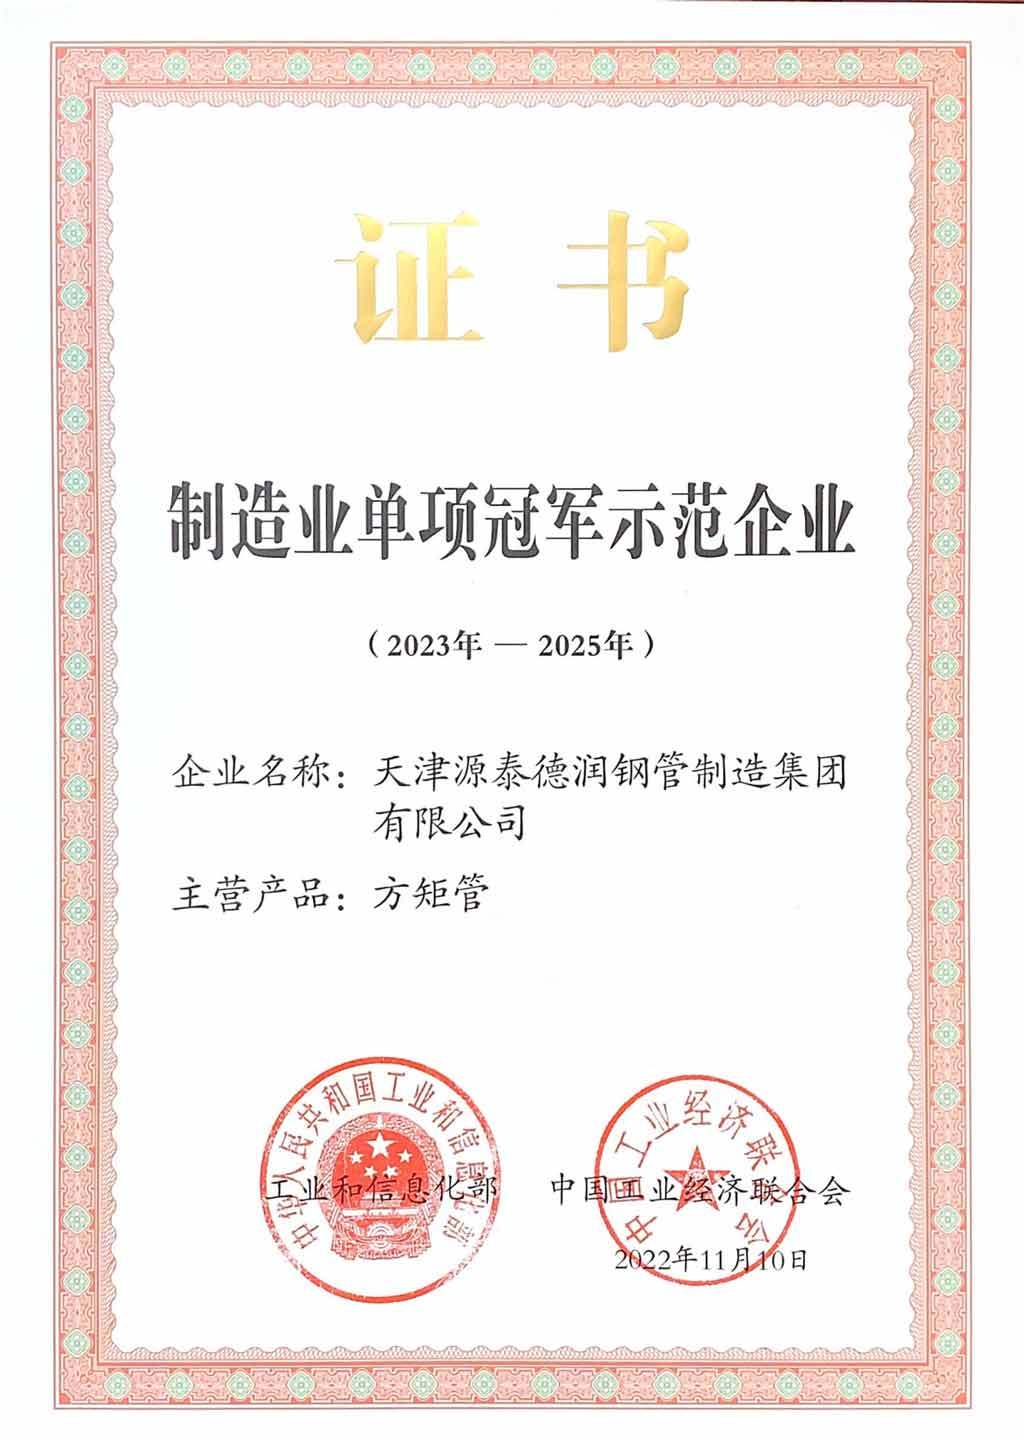 Tianjin Yuantai Derun Steel Pipe Manufacturing Group Co., Ltd. was selected as the "seventh batch of national level single champion demonstration enterprises in the manufacturing industry" based on the borrower's rectangular tube.